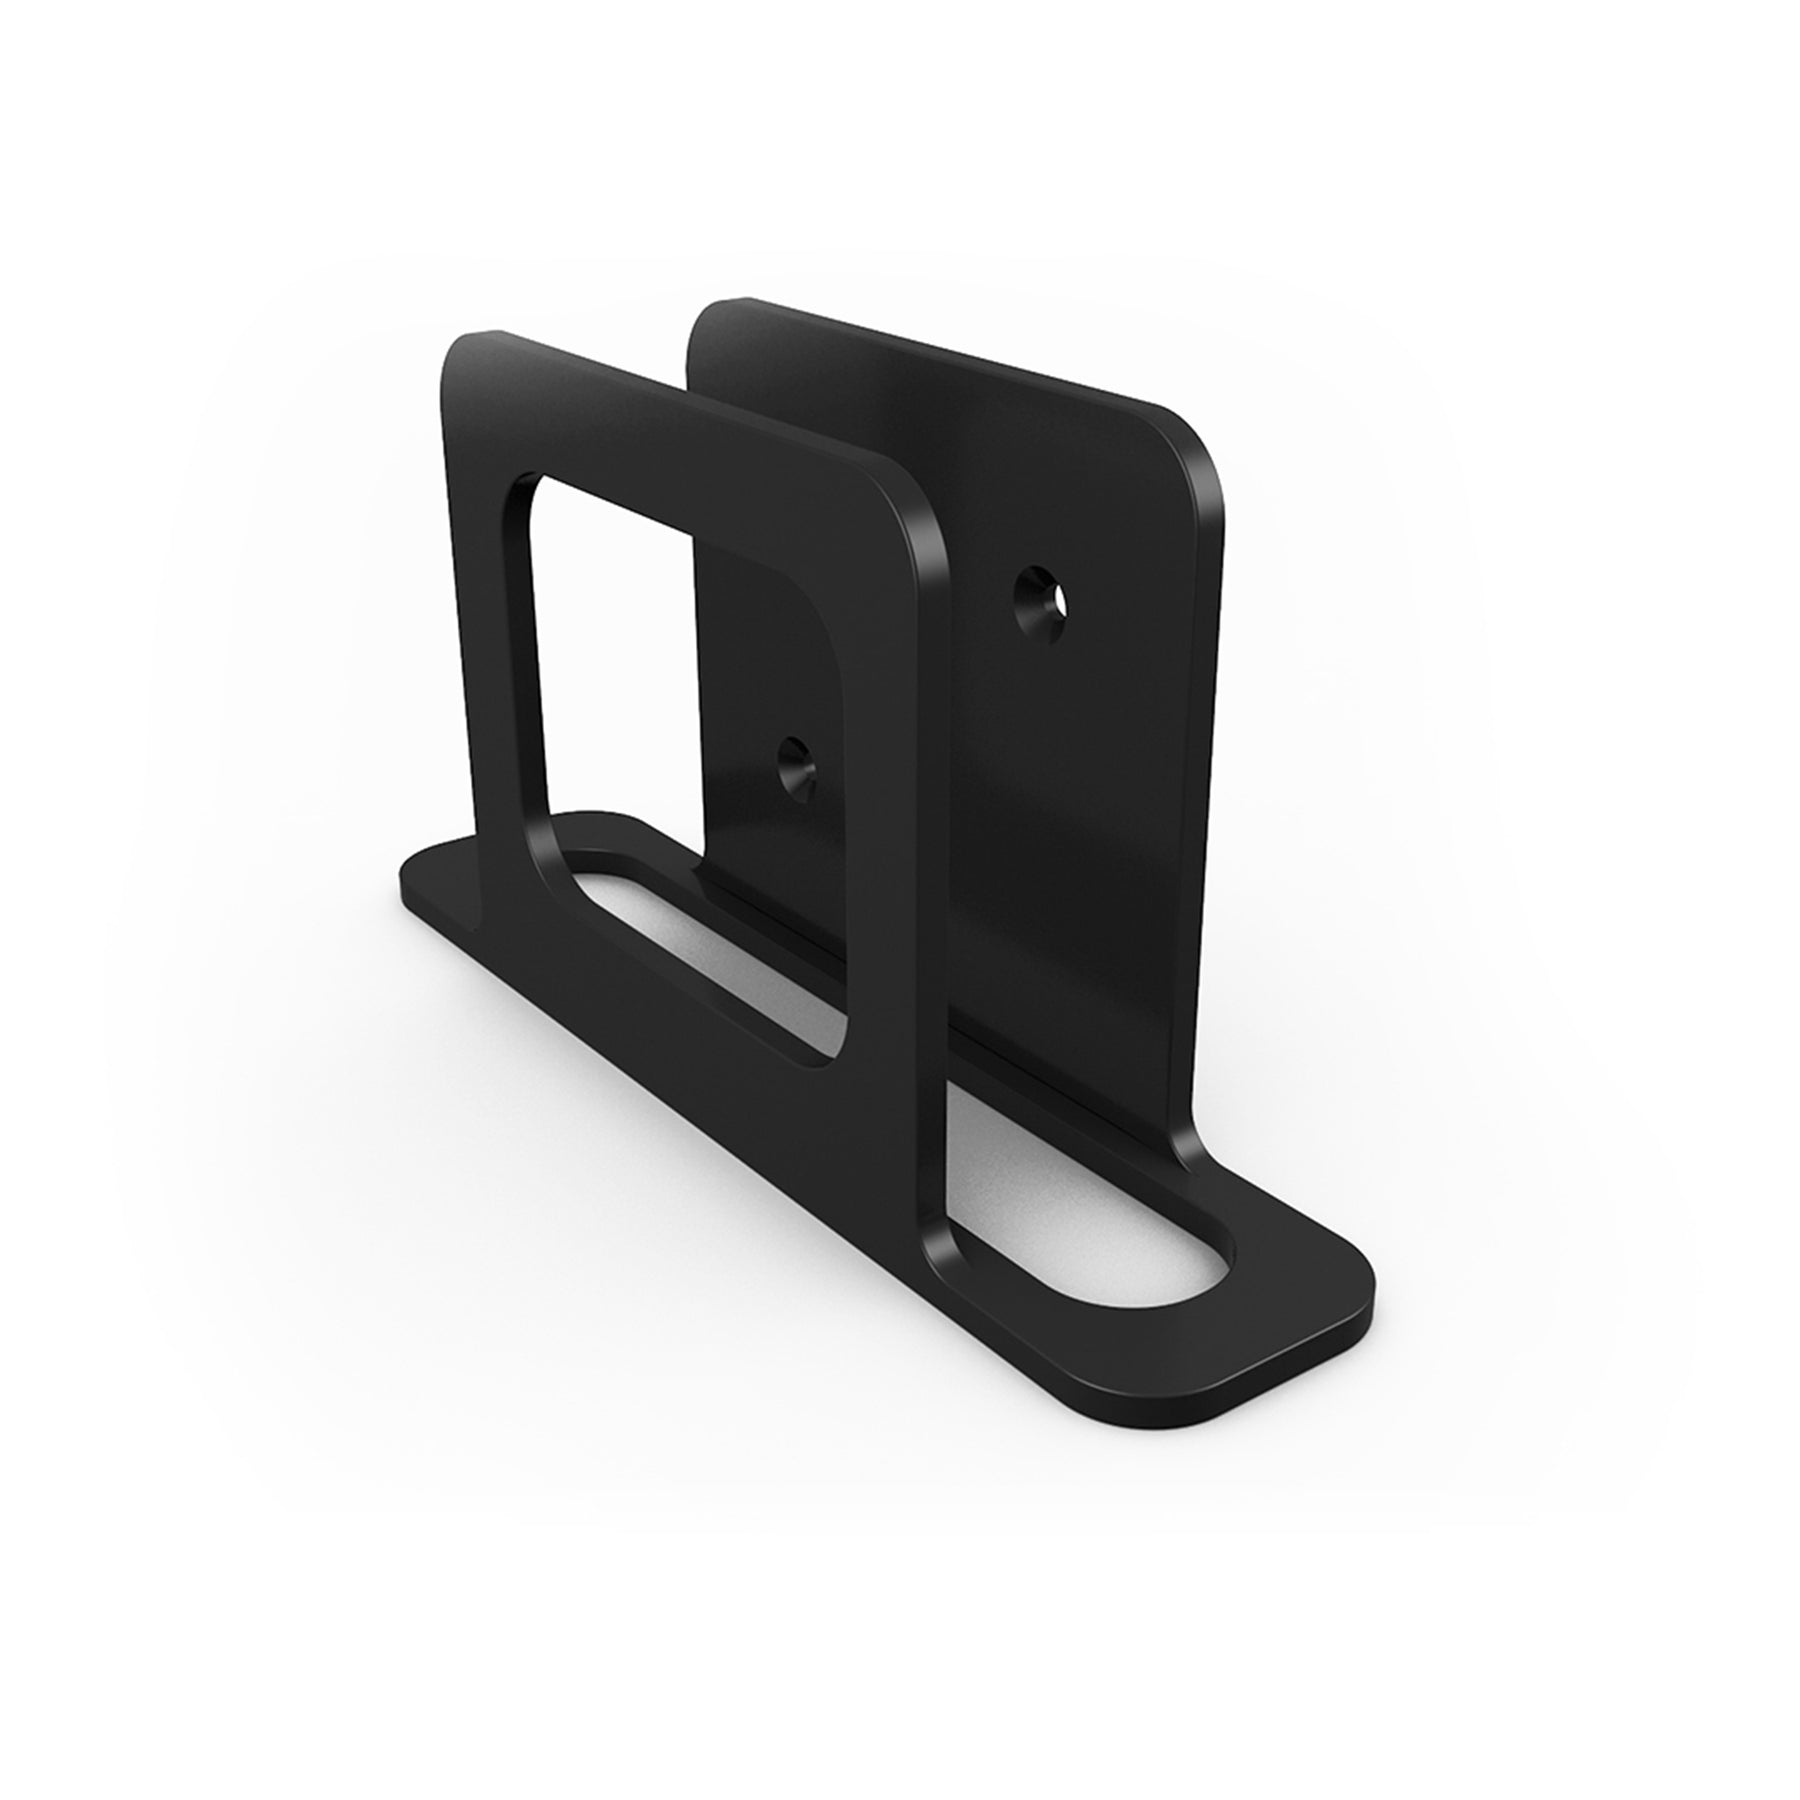 Wall mount for digital signage player